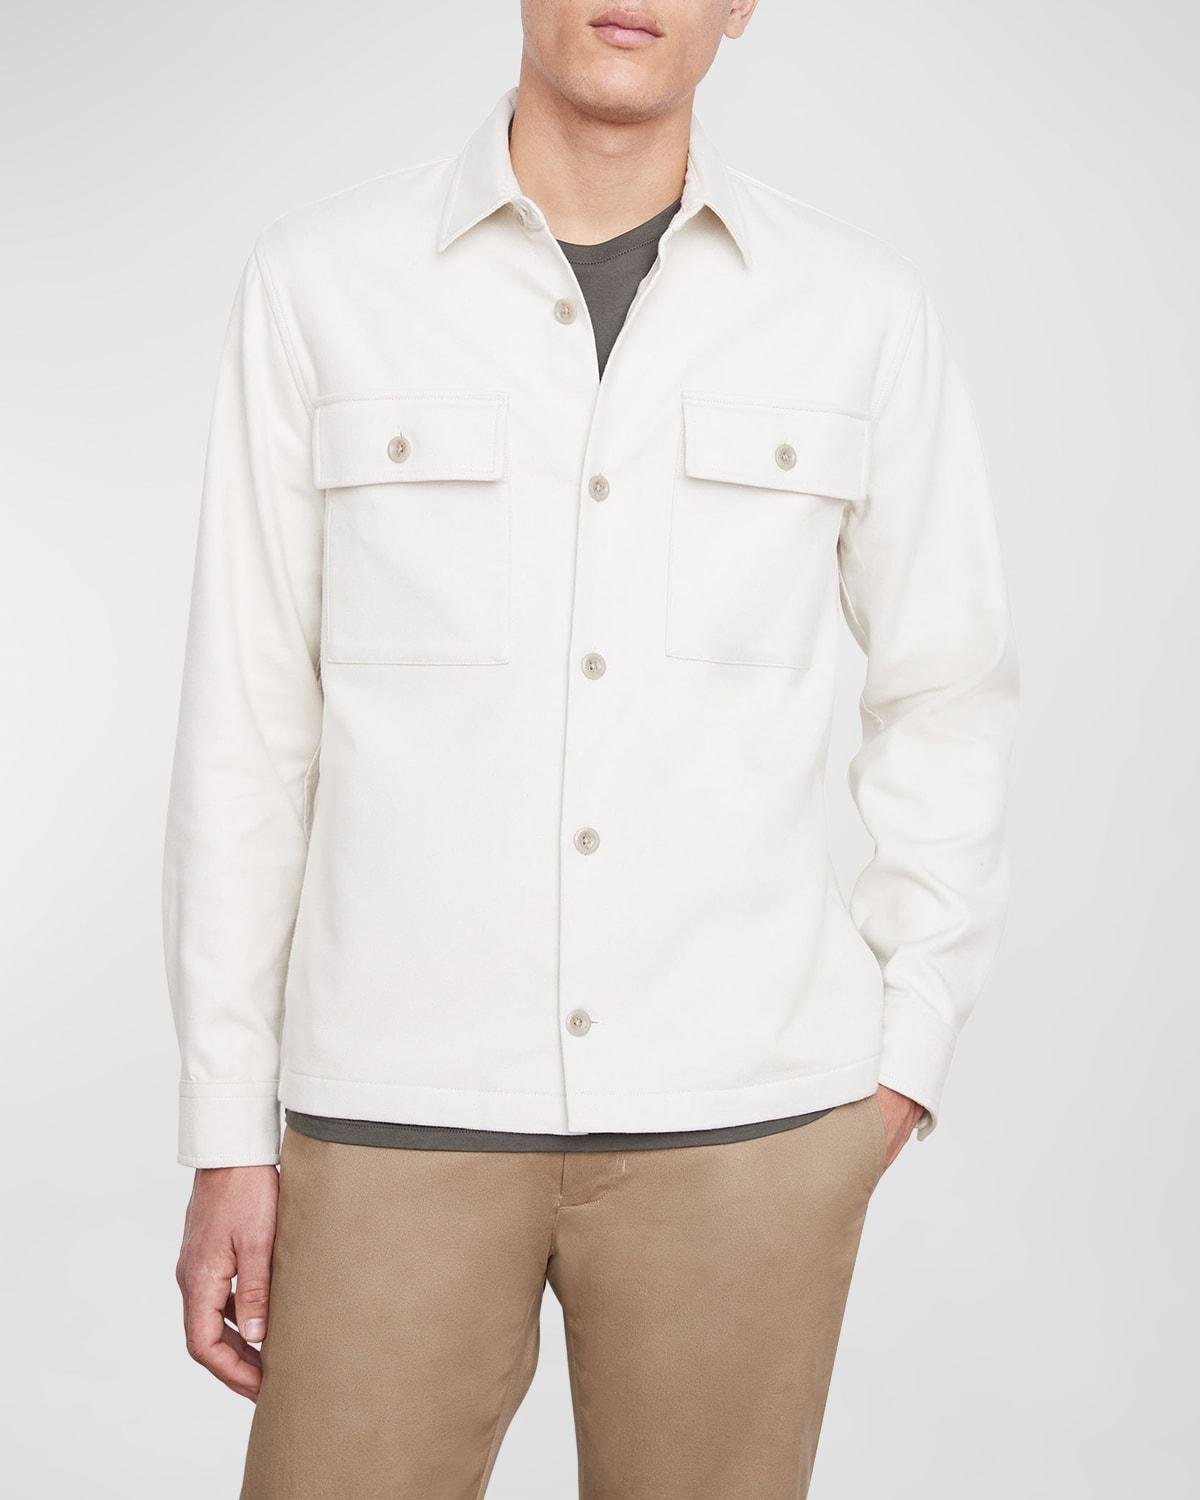 Men's Double-Face Workwear Shirt by VINCE